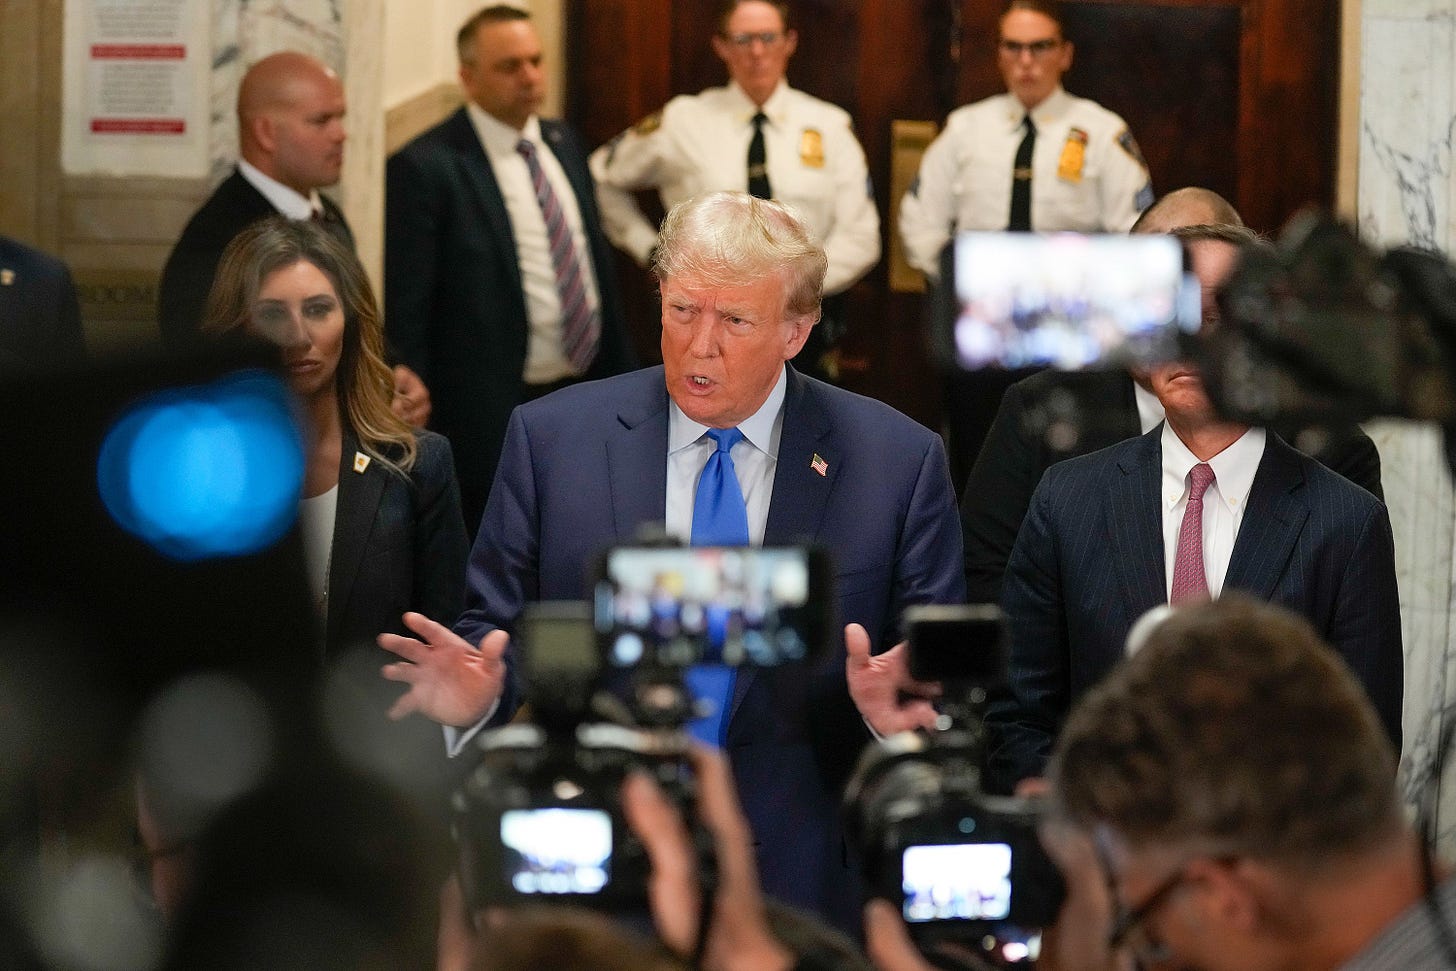 Trump speaks to the media at the New York Supreme Court on October 2. <a href="https://www.cnn.com/politics/live-news/trump-fraud-trial-new-york-10-02-23/h_e83e2797310240ba7e8540e4c80ba014" target="_blank">On his way to the courtroom</a>, Trump said the civil fraud trial is a "continuation of the single greatest witch hunt of all time." He also called it "a scam and a sham."